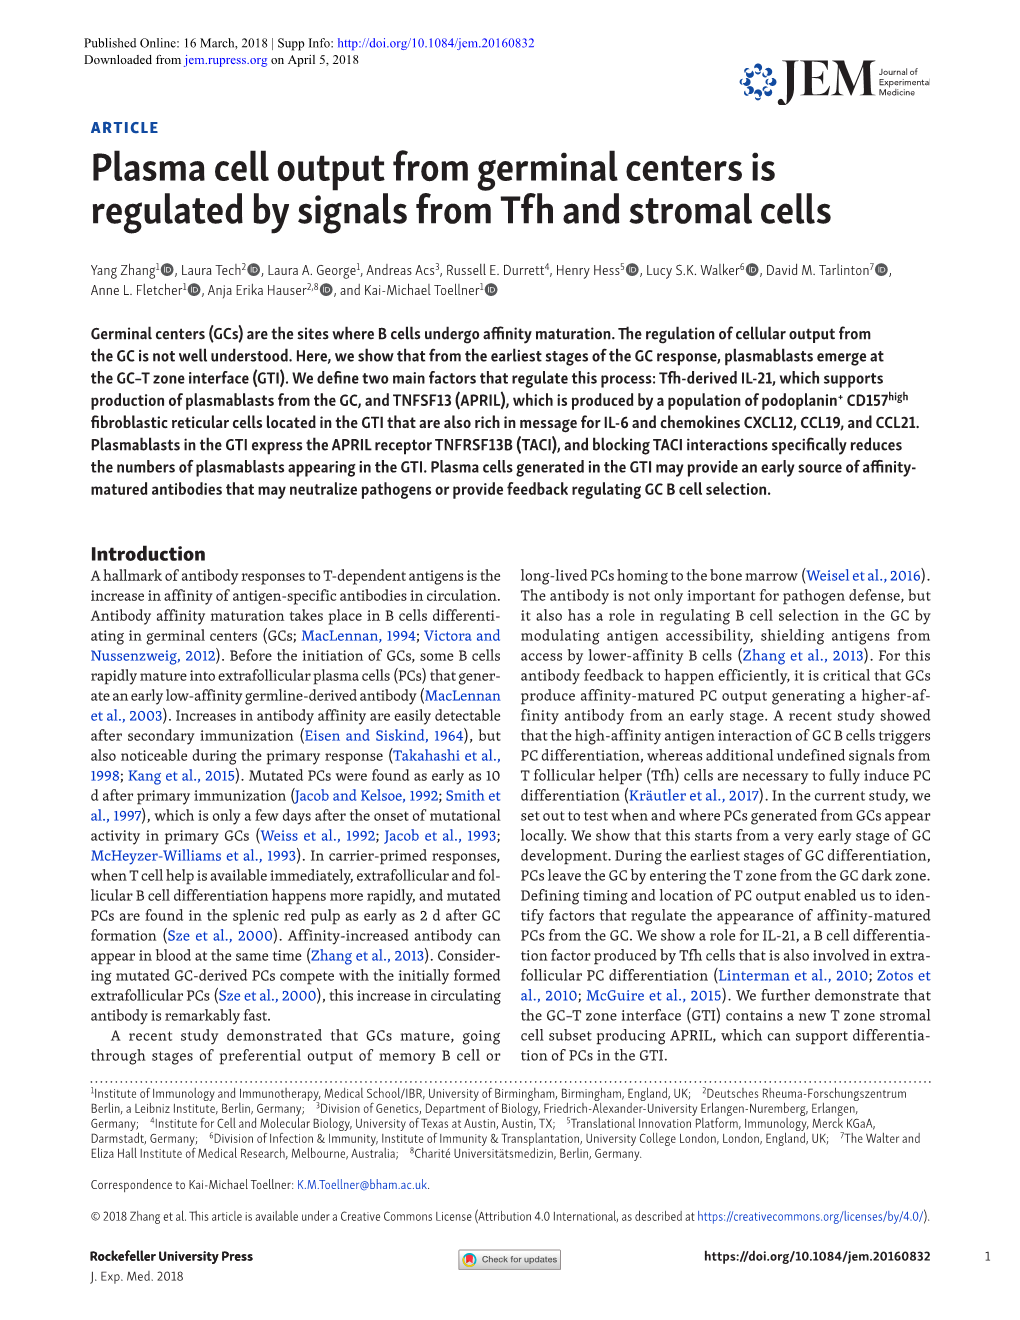 Plasma Cell Output from Germinal Centers Is Regulated by Signals from Tfh and Stromal Cells